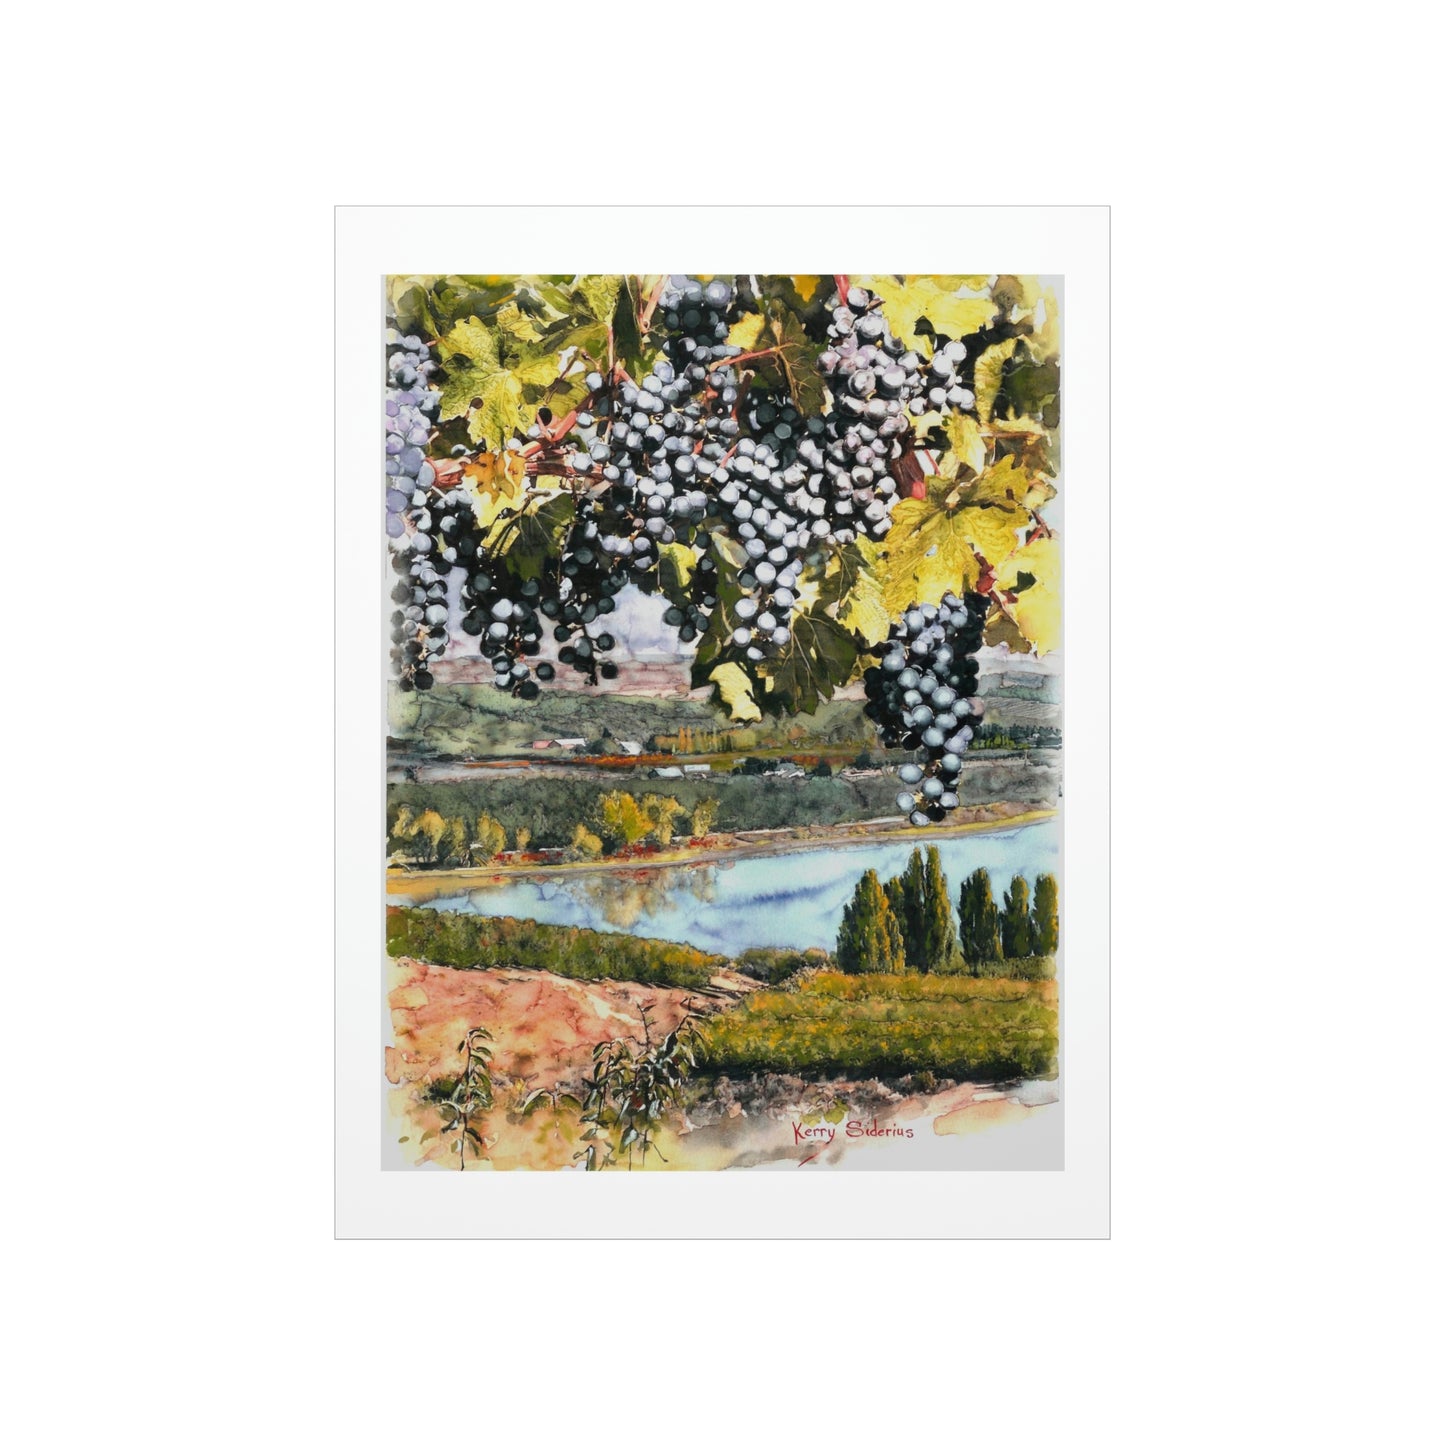 "Grapes Over The Columbia" Premium Matte Vertical Posters - Kerry Siderius Art 